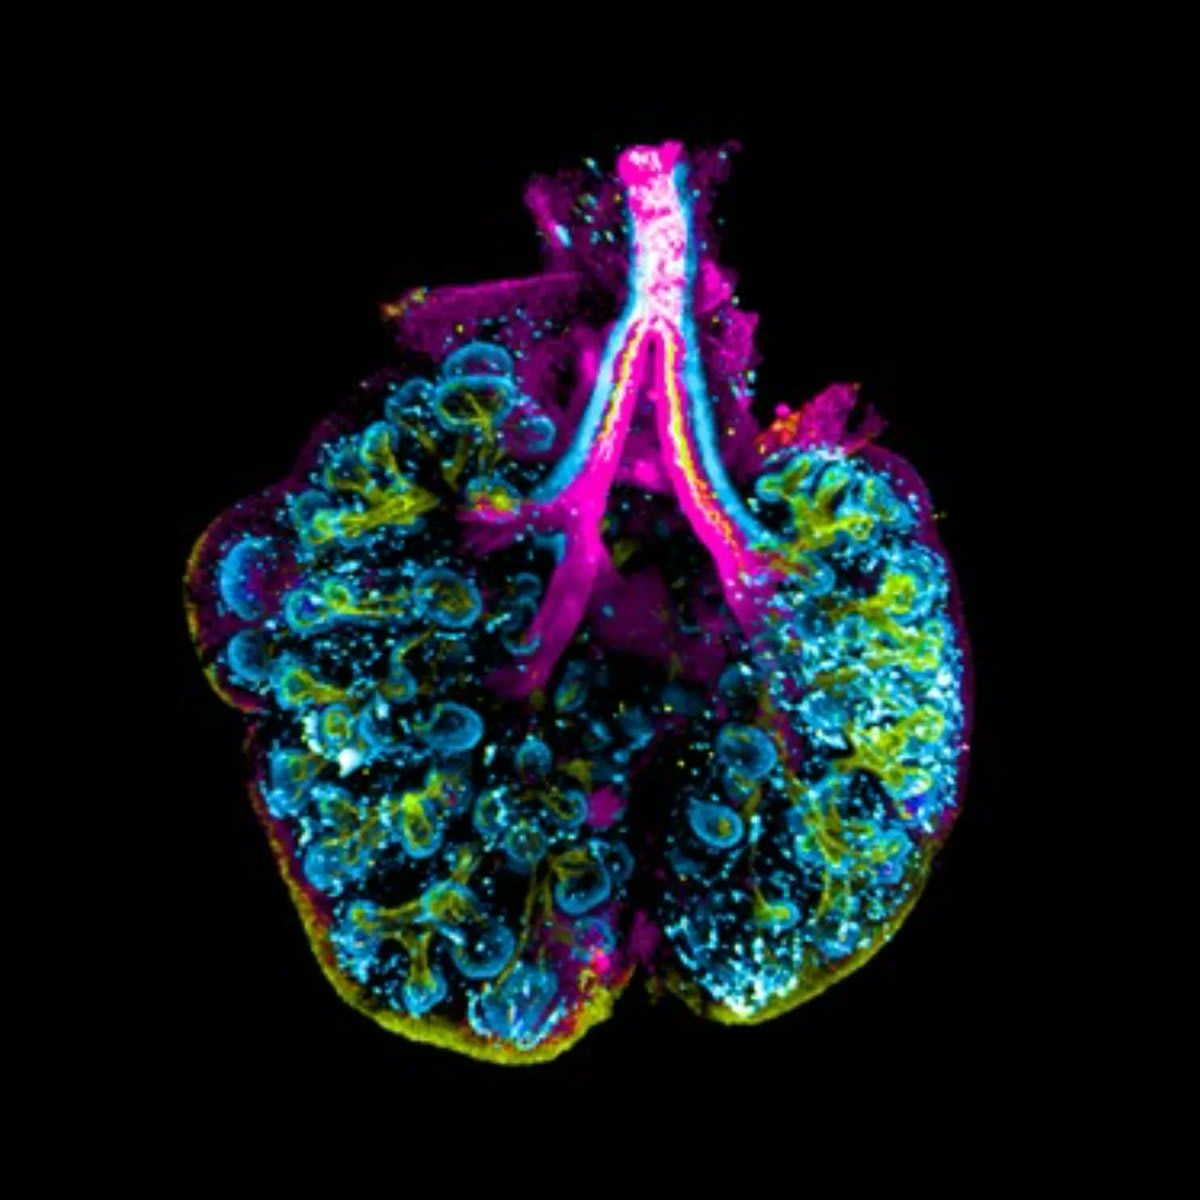 Staining lab-grown, developing lung tissue reveals the different types of stem cells composing it. These cells eventually divide into different tissues that compose our complex airways. Visualizing them allows researchers to map how lungs grow. 📷 Casey Ah-Cann/@wehi_research